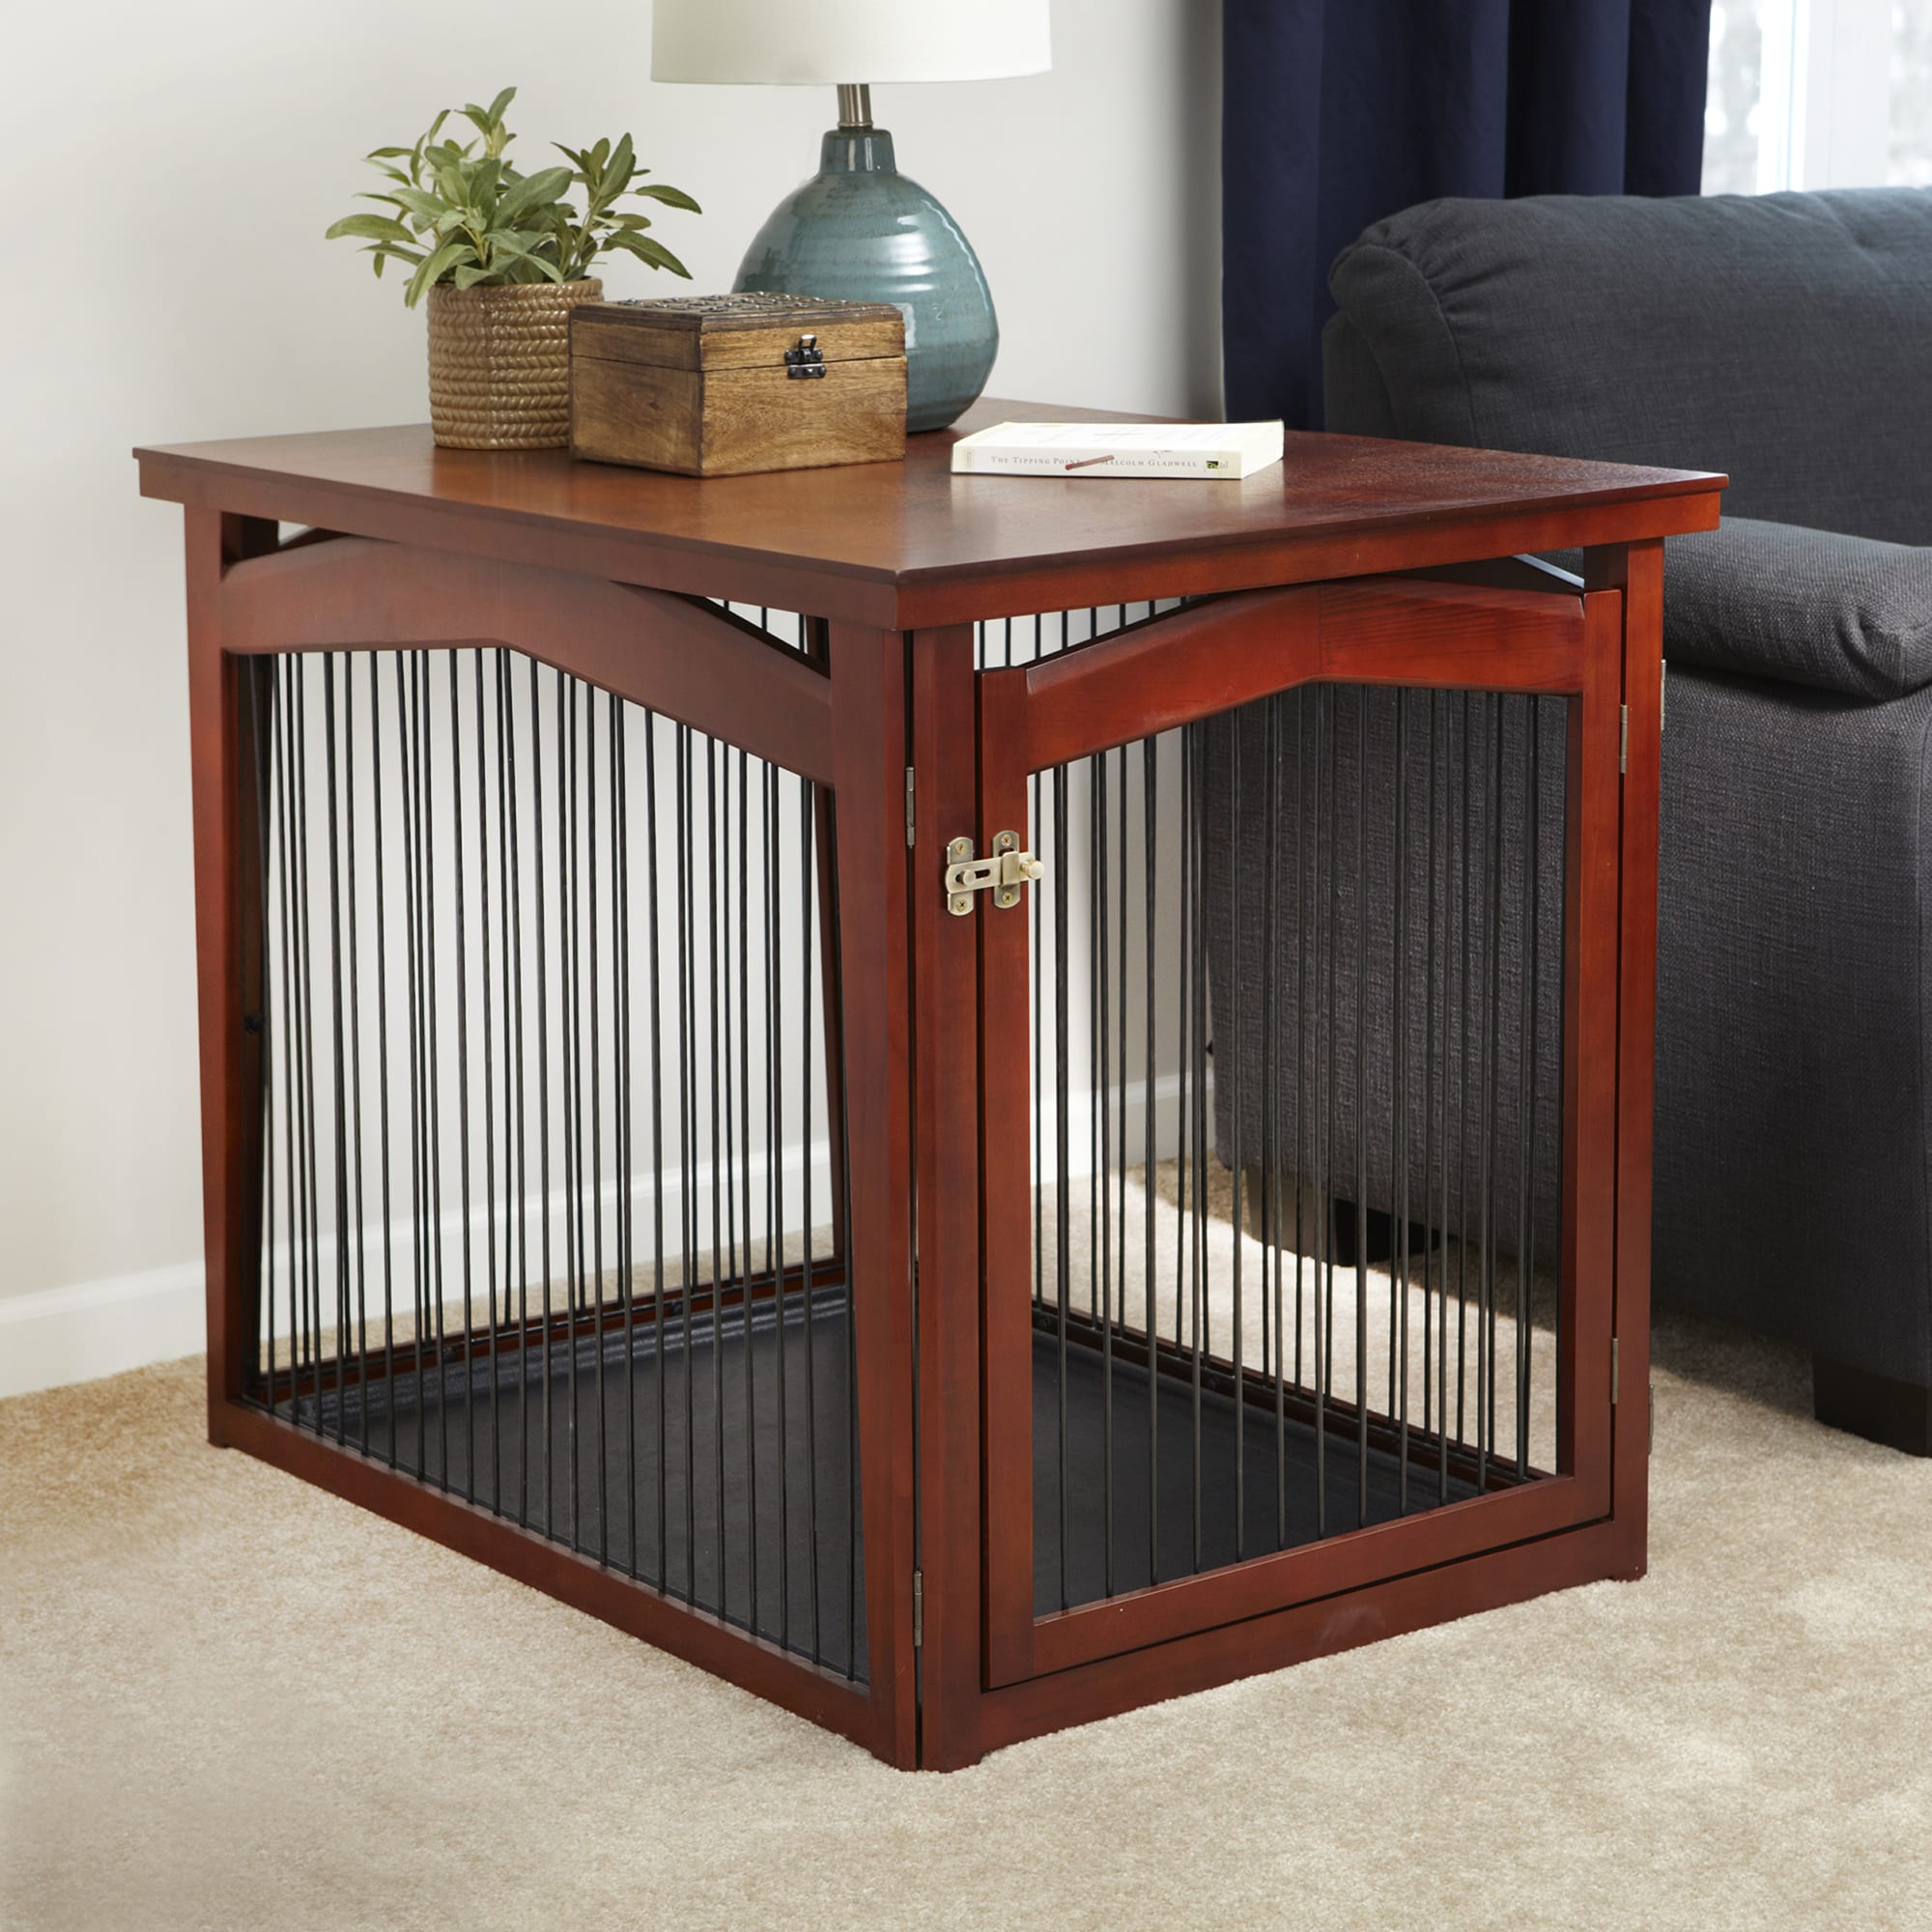 Photos - Dog Kennel Merry Products Configurable 2-in-1 Pet Crate and Gate, Medium Crate & Gate